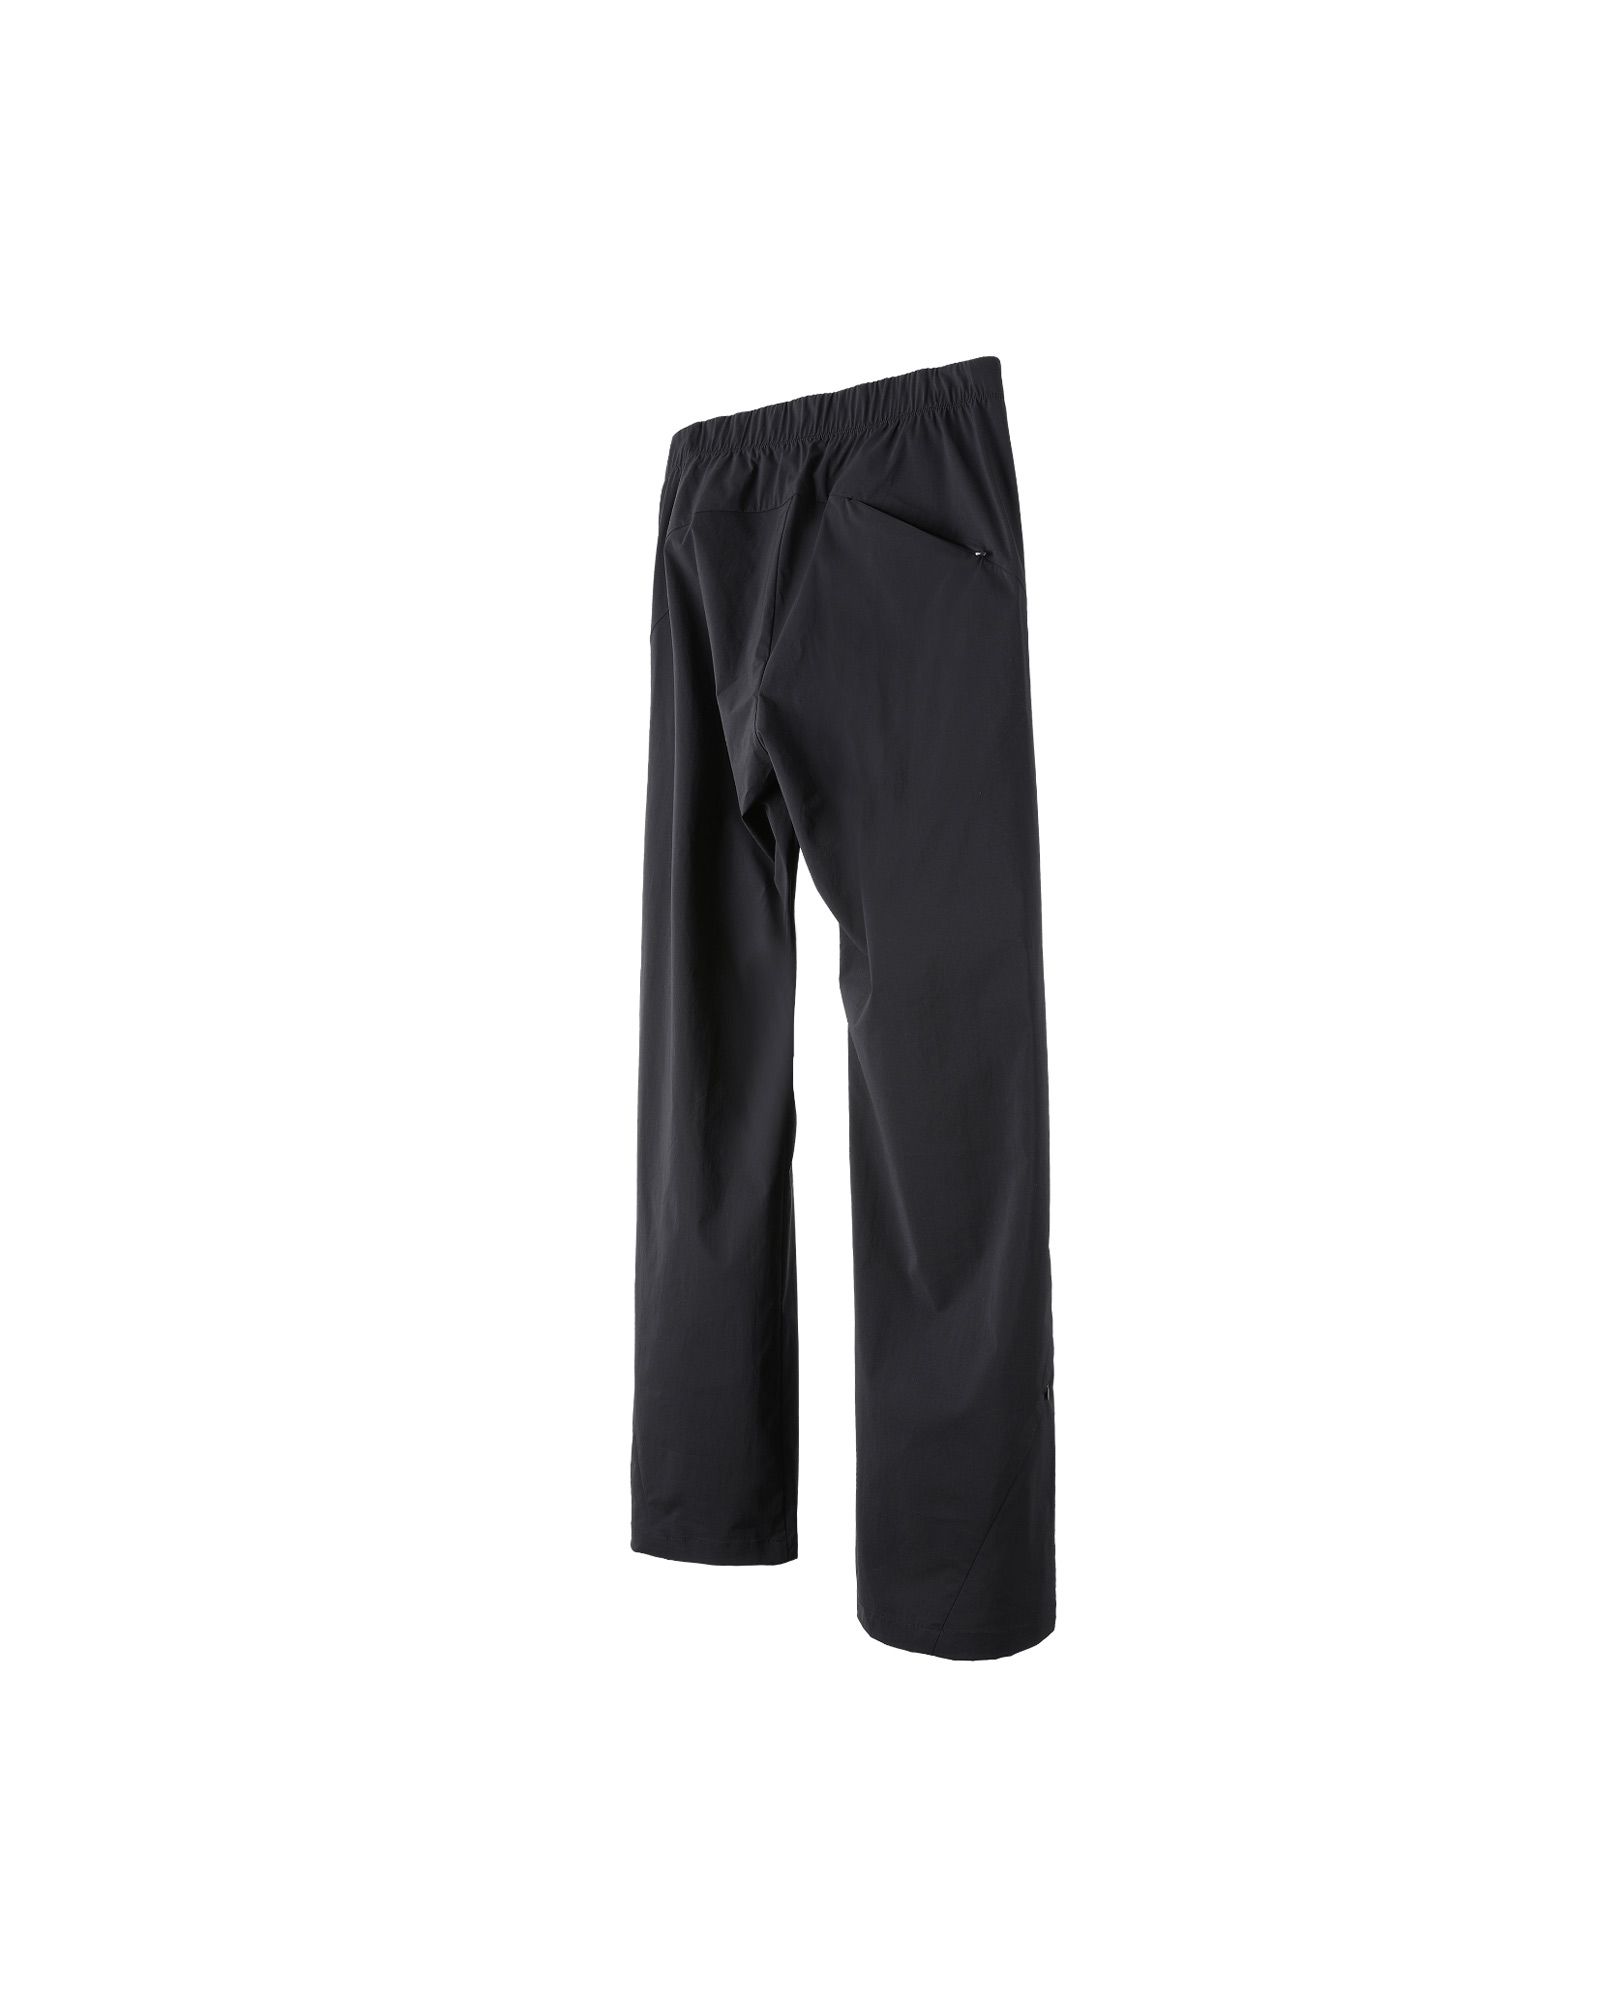 POST ARCHIVE FACTION - 5.0 TECHNICAL PANTS RIGHT | Detail